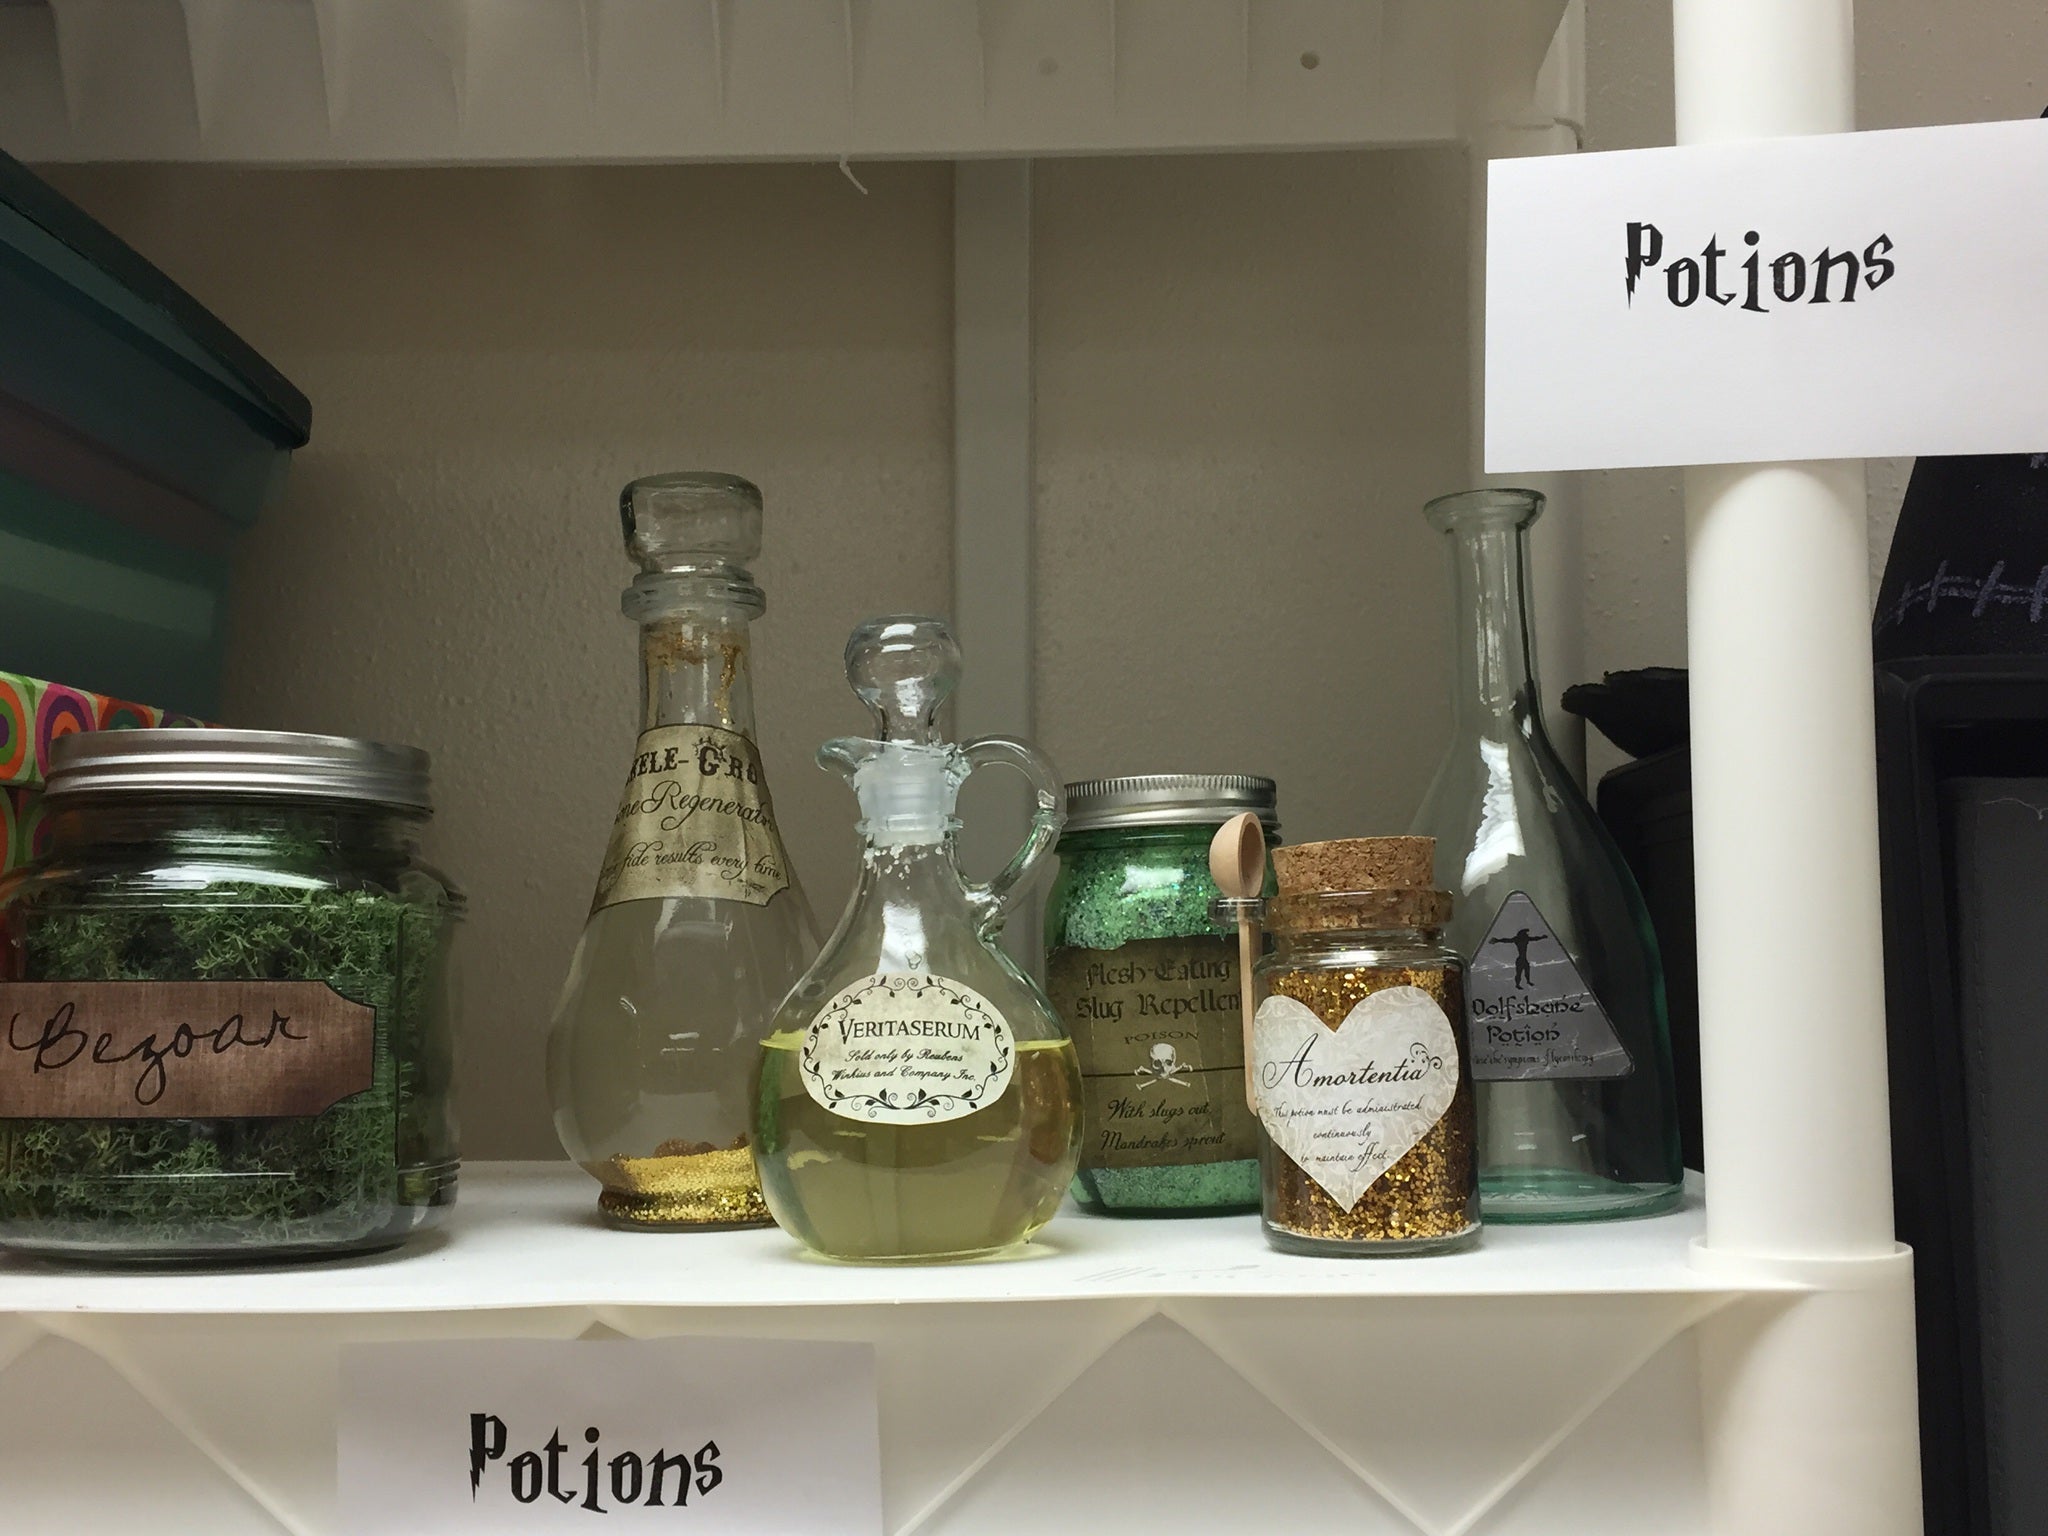 The potions cabinet